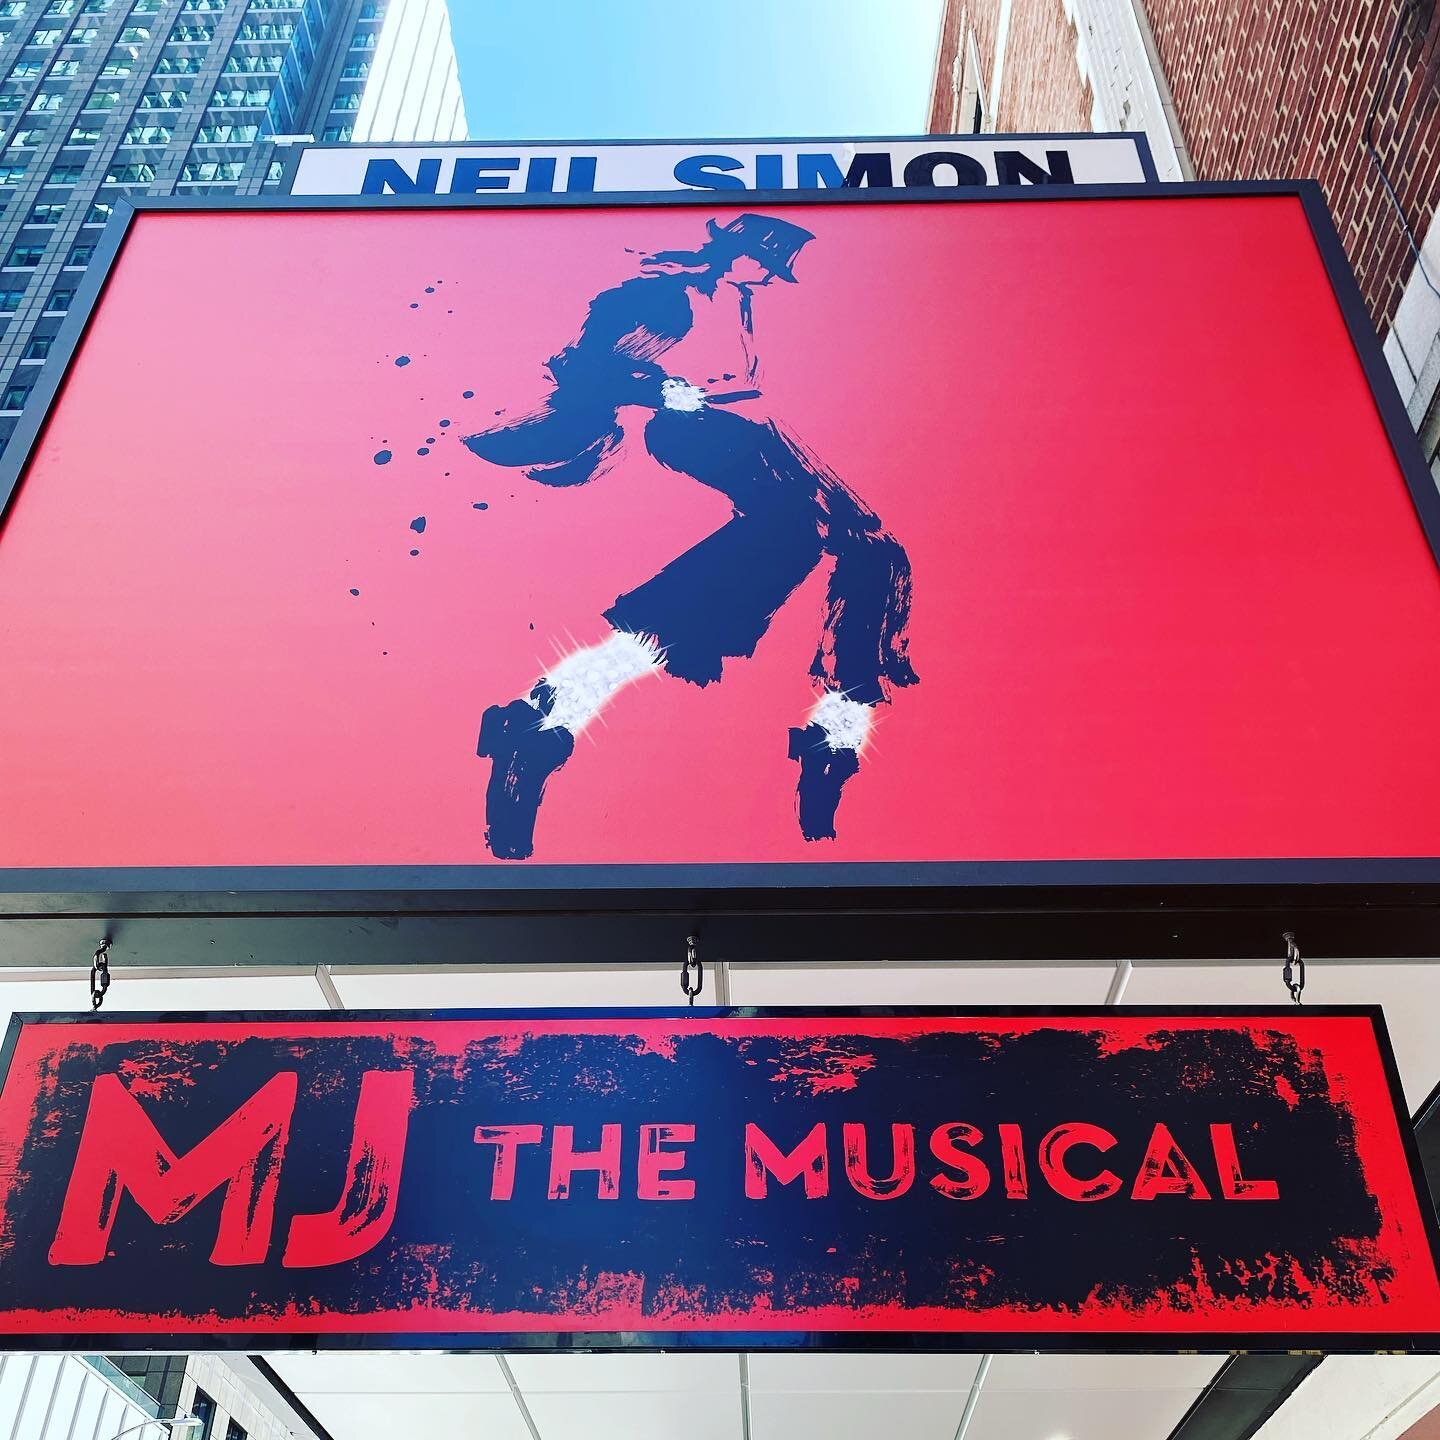 So excited...Back to 1 everybody!!!! @mjthemusical #neilsimontheatre #davethemanager